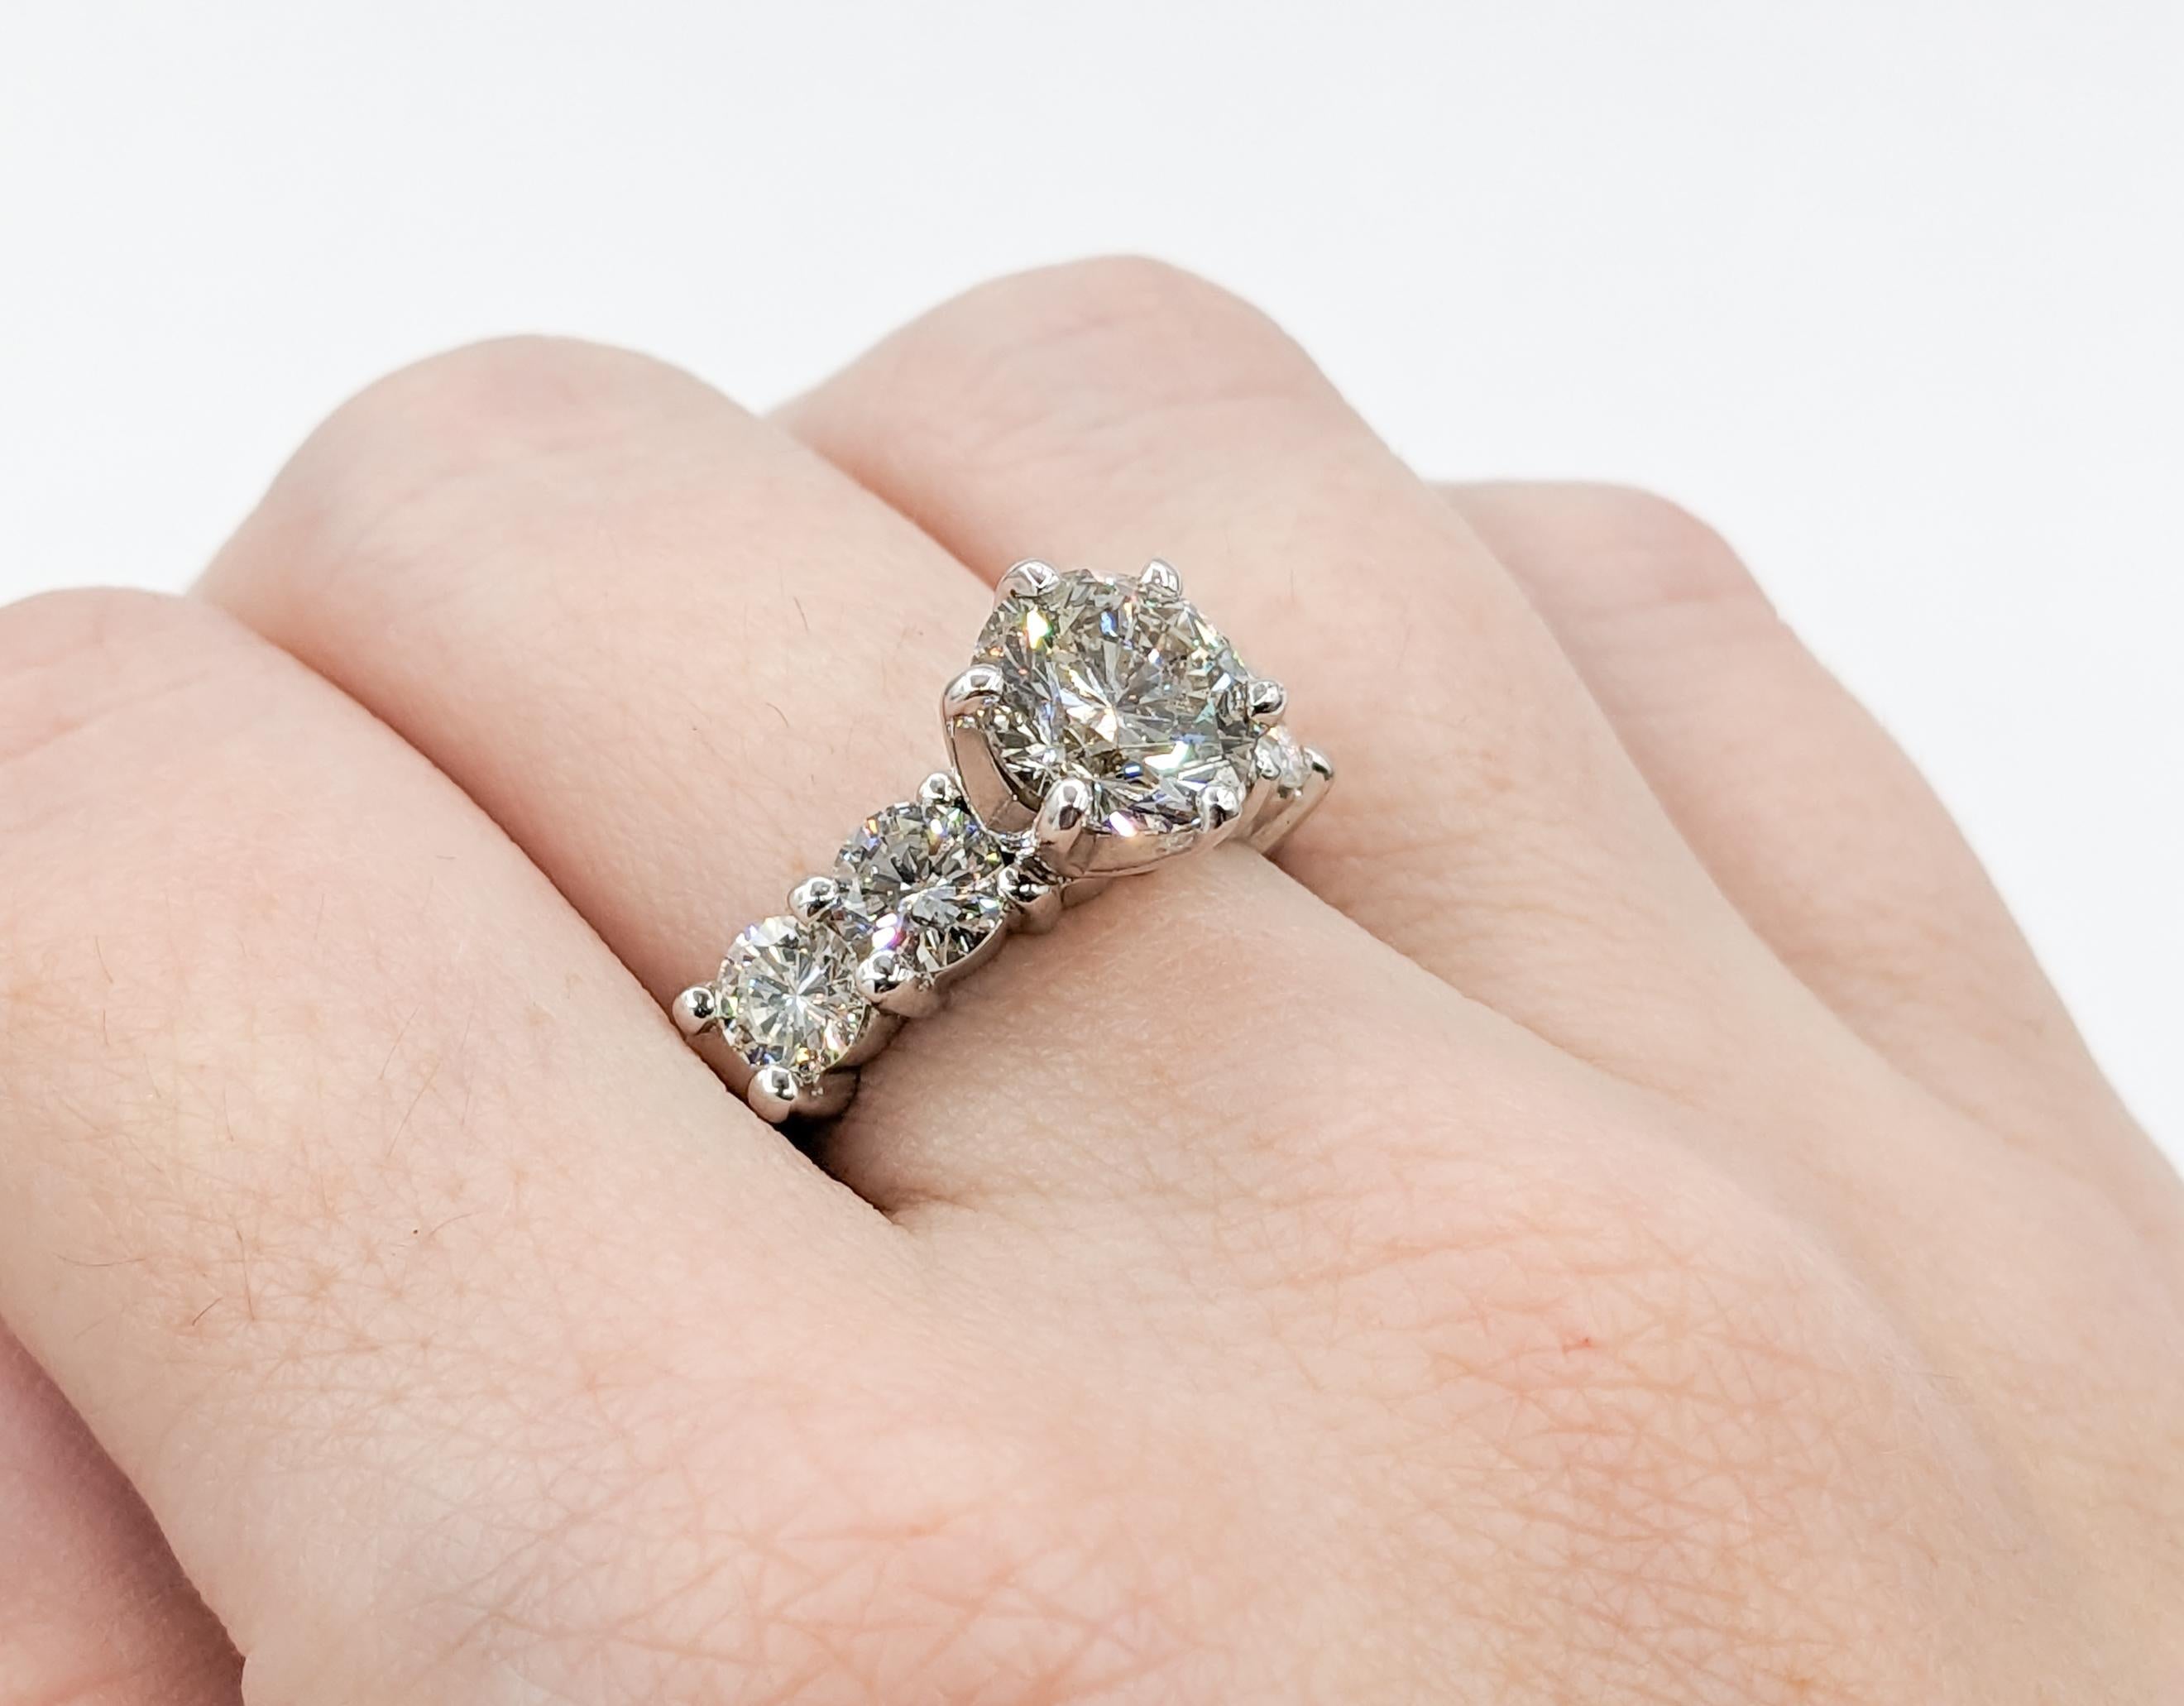 3.55ctw Diamond Engagement Ring in 14kt White Gold Ring

Step into a world of timeless elegance with this mesmerizing diamond engagement ring. Masterfully crafted in 14kt White Gold, it showcases a dazzling 2.05ct Round Diamond, possessing an I1